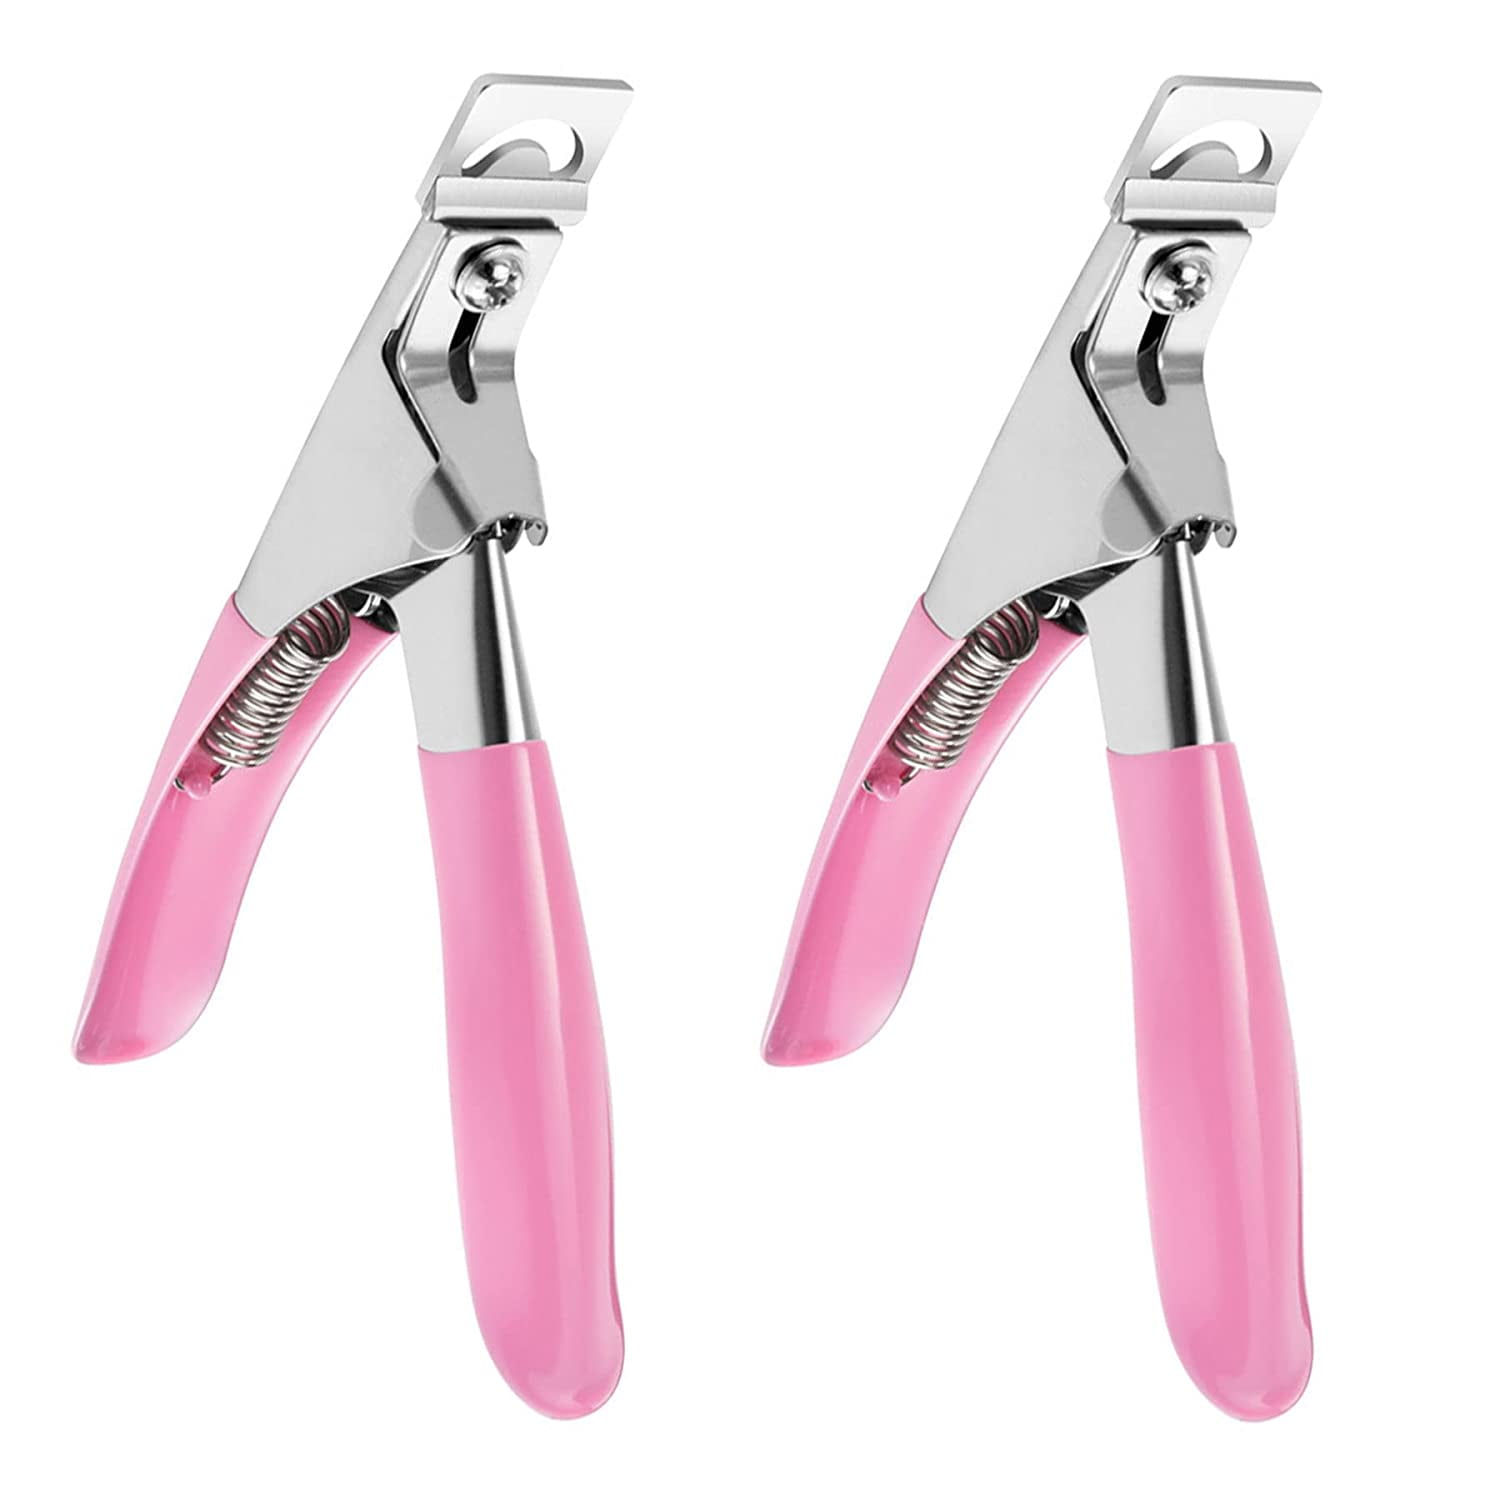 144 CLIPPERS) 2 FINGER NAIL CLIPPER WITH FILE SALONS/MANICURE/PEDICURE/BULK